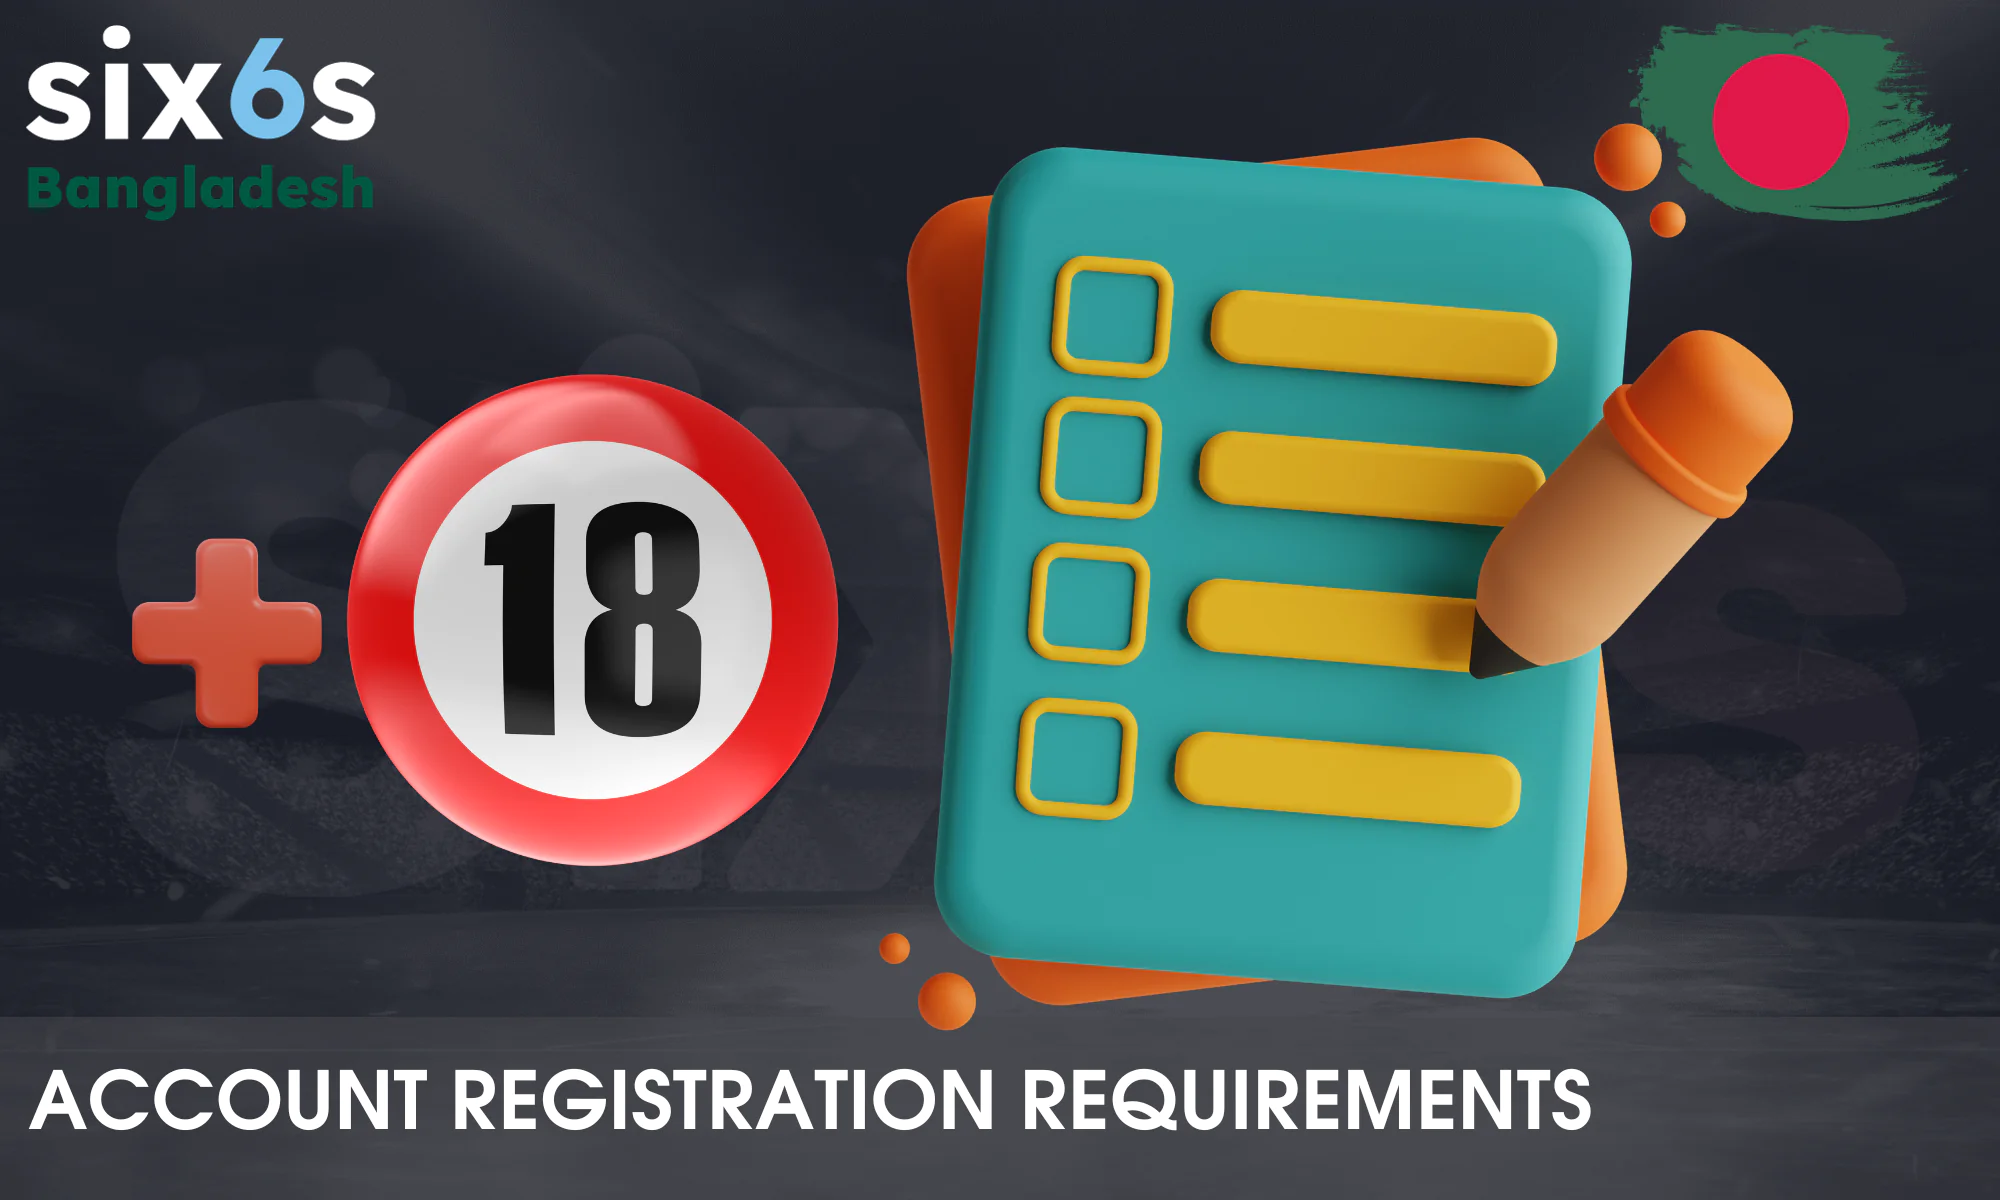 Basic requirements for registering an account with Six6s